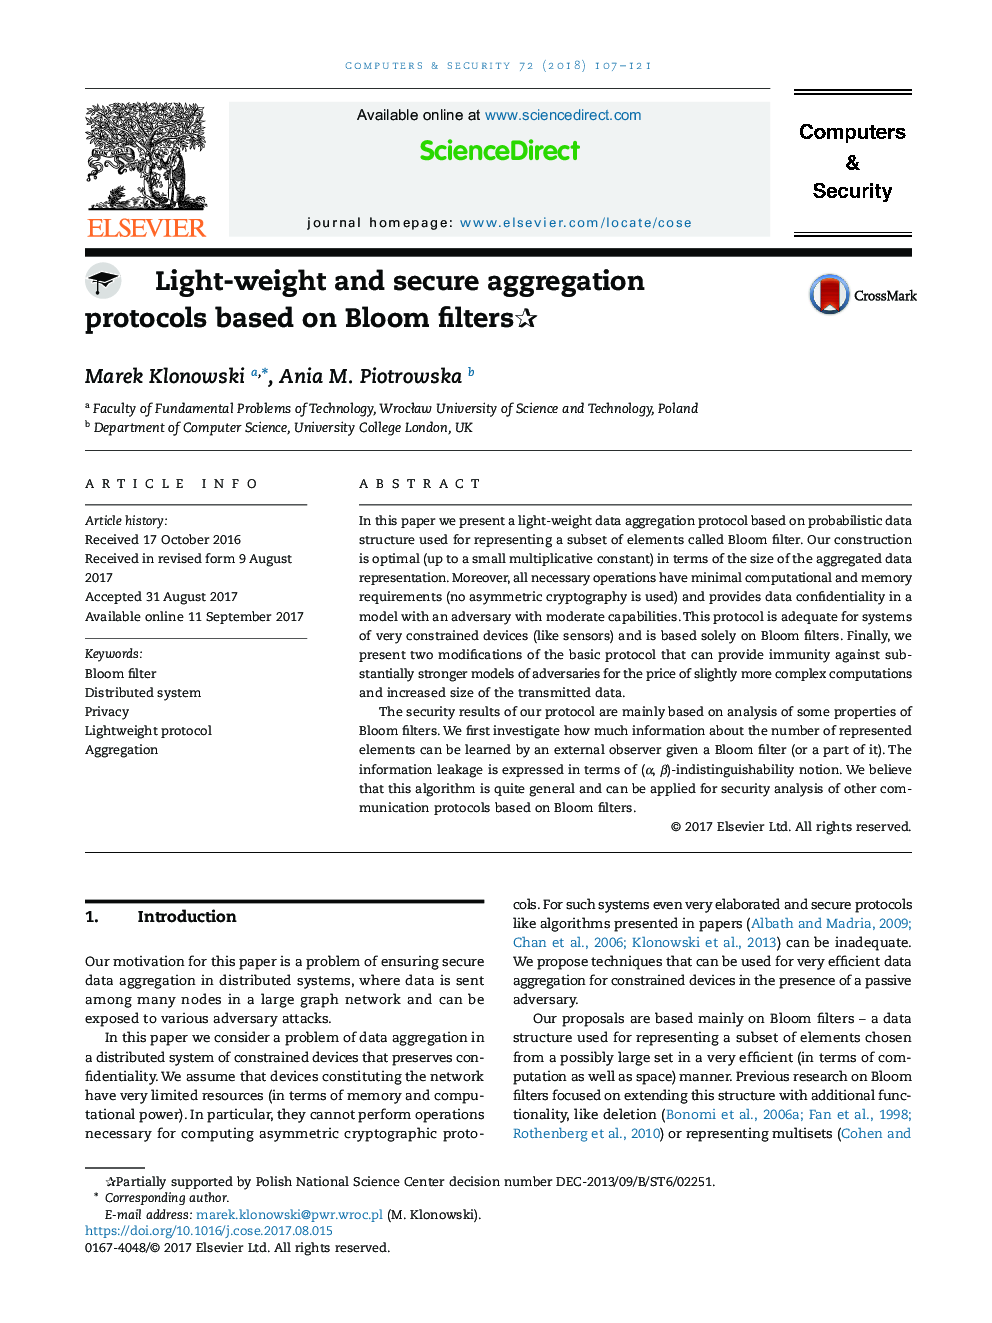 Light-weight and secure aggregation protocols based on Bloom filtersâ°